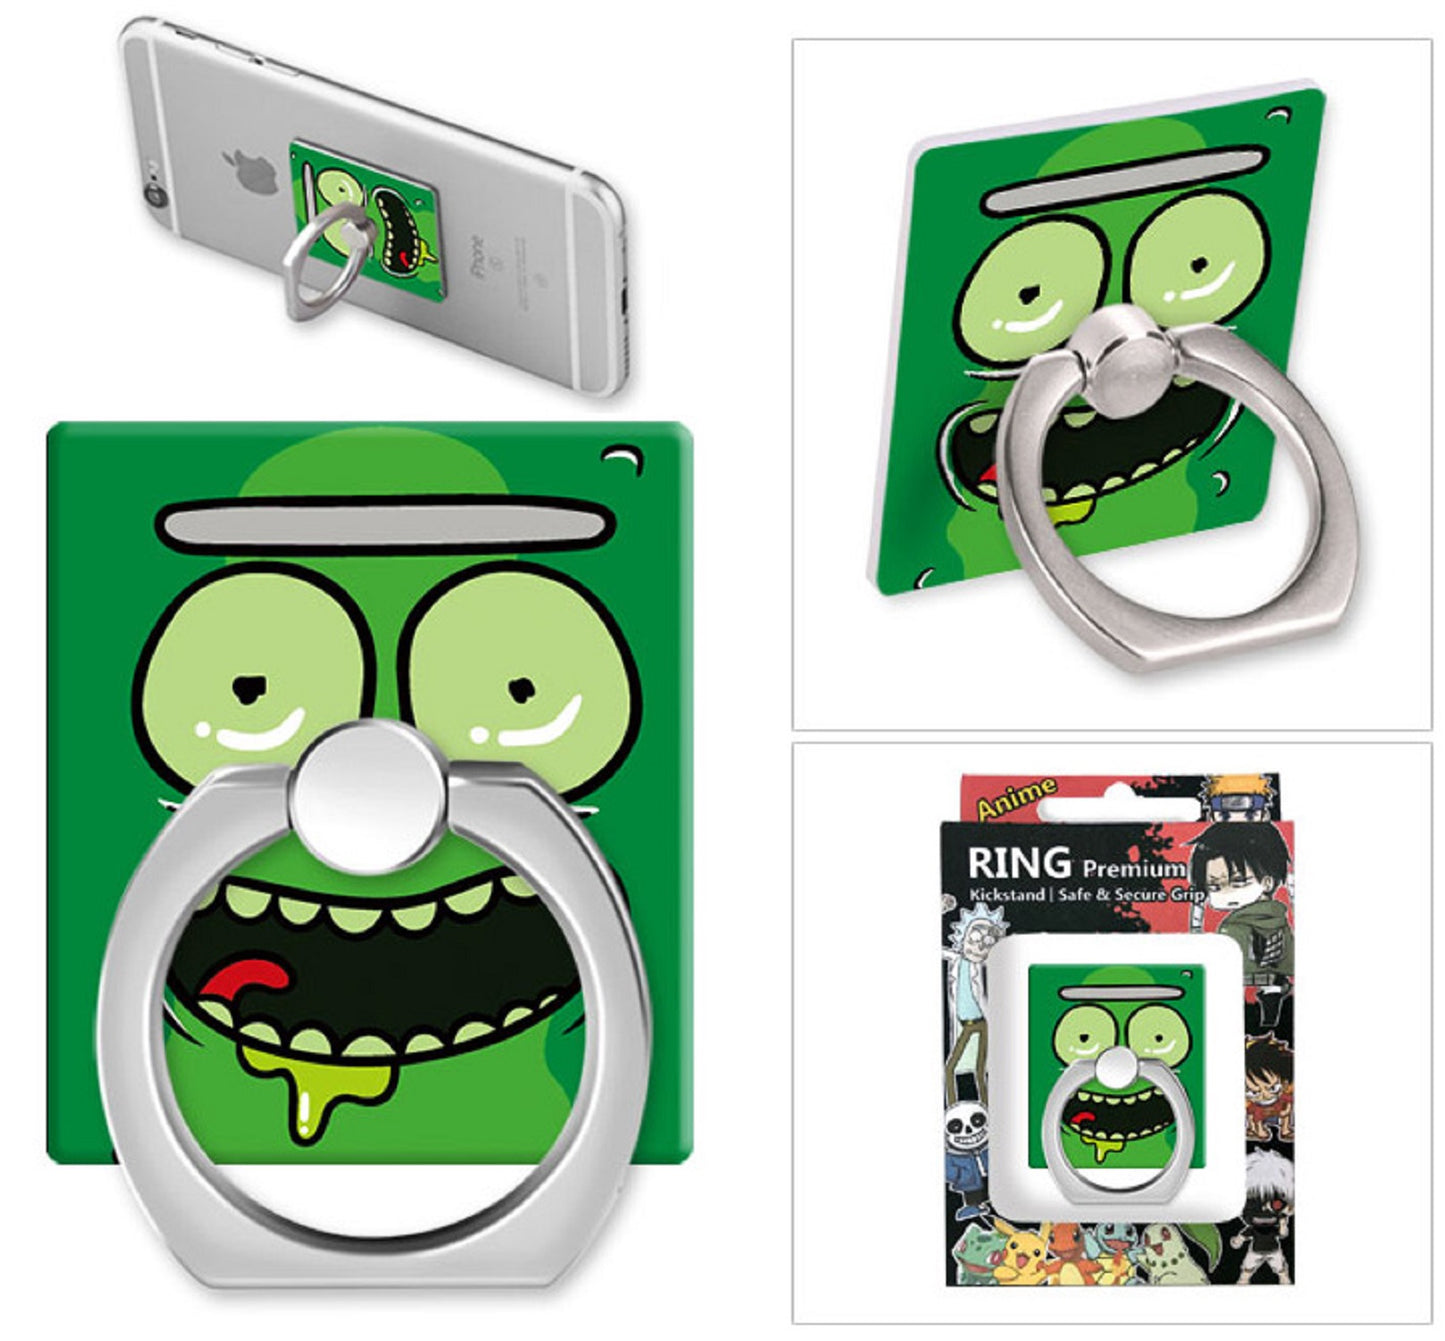 Rick and Morty Phone Holder - Super Anime Store FREE SHIPPING FAST SHIPPING USA